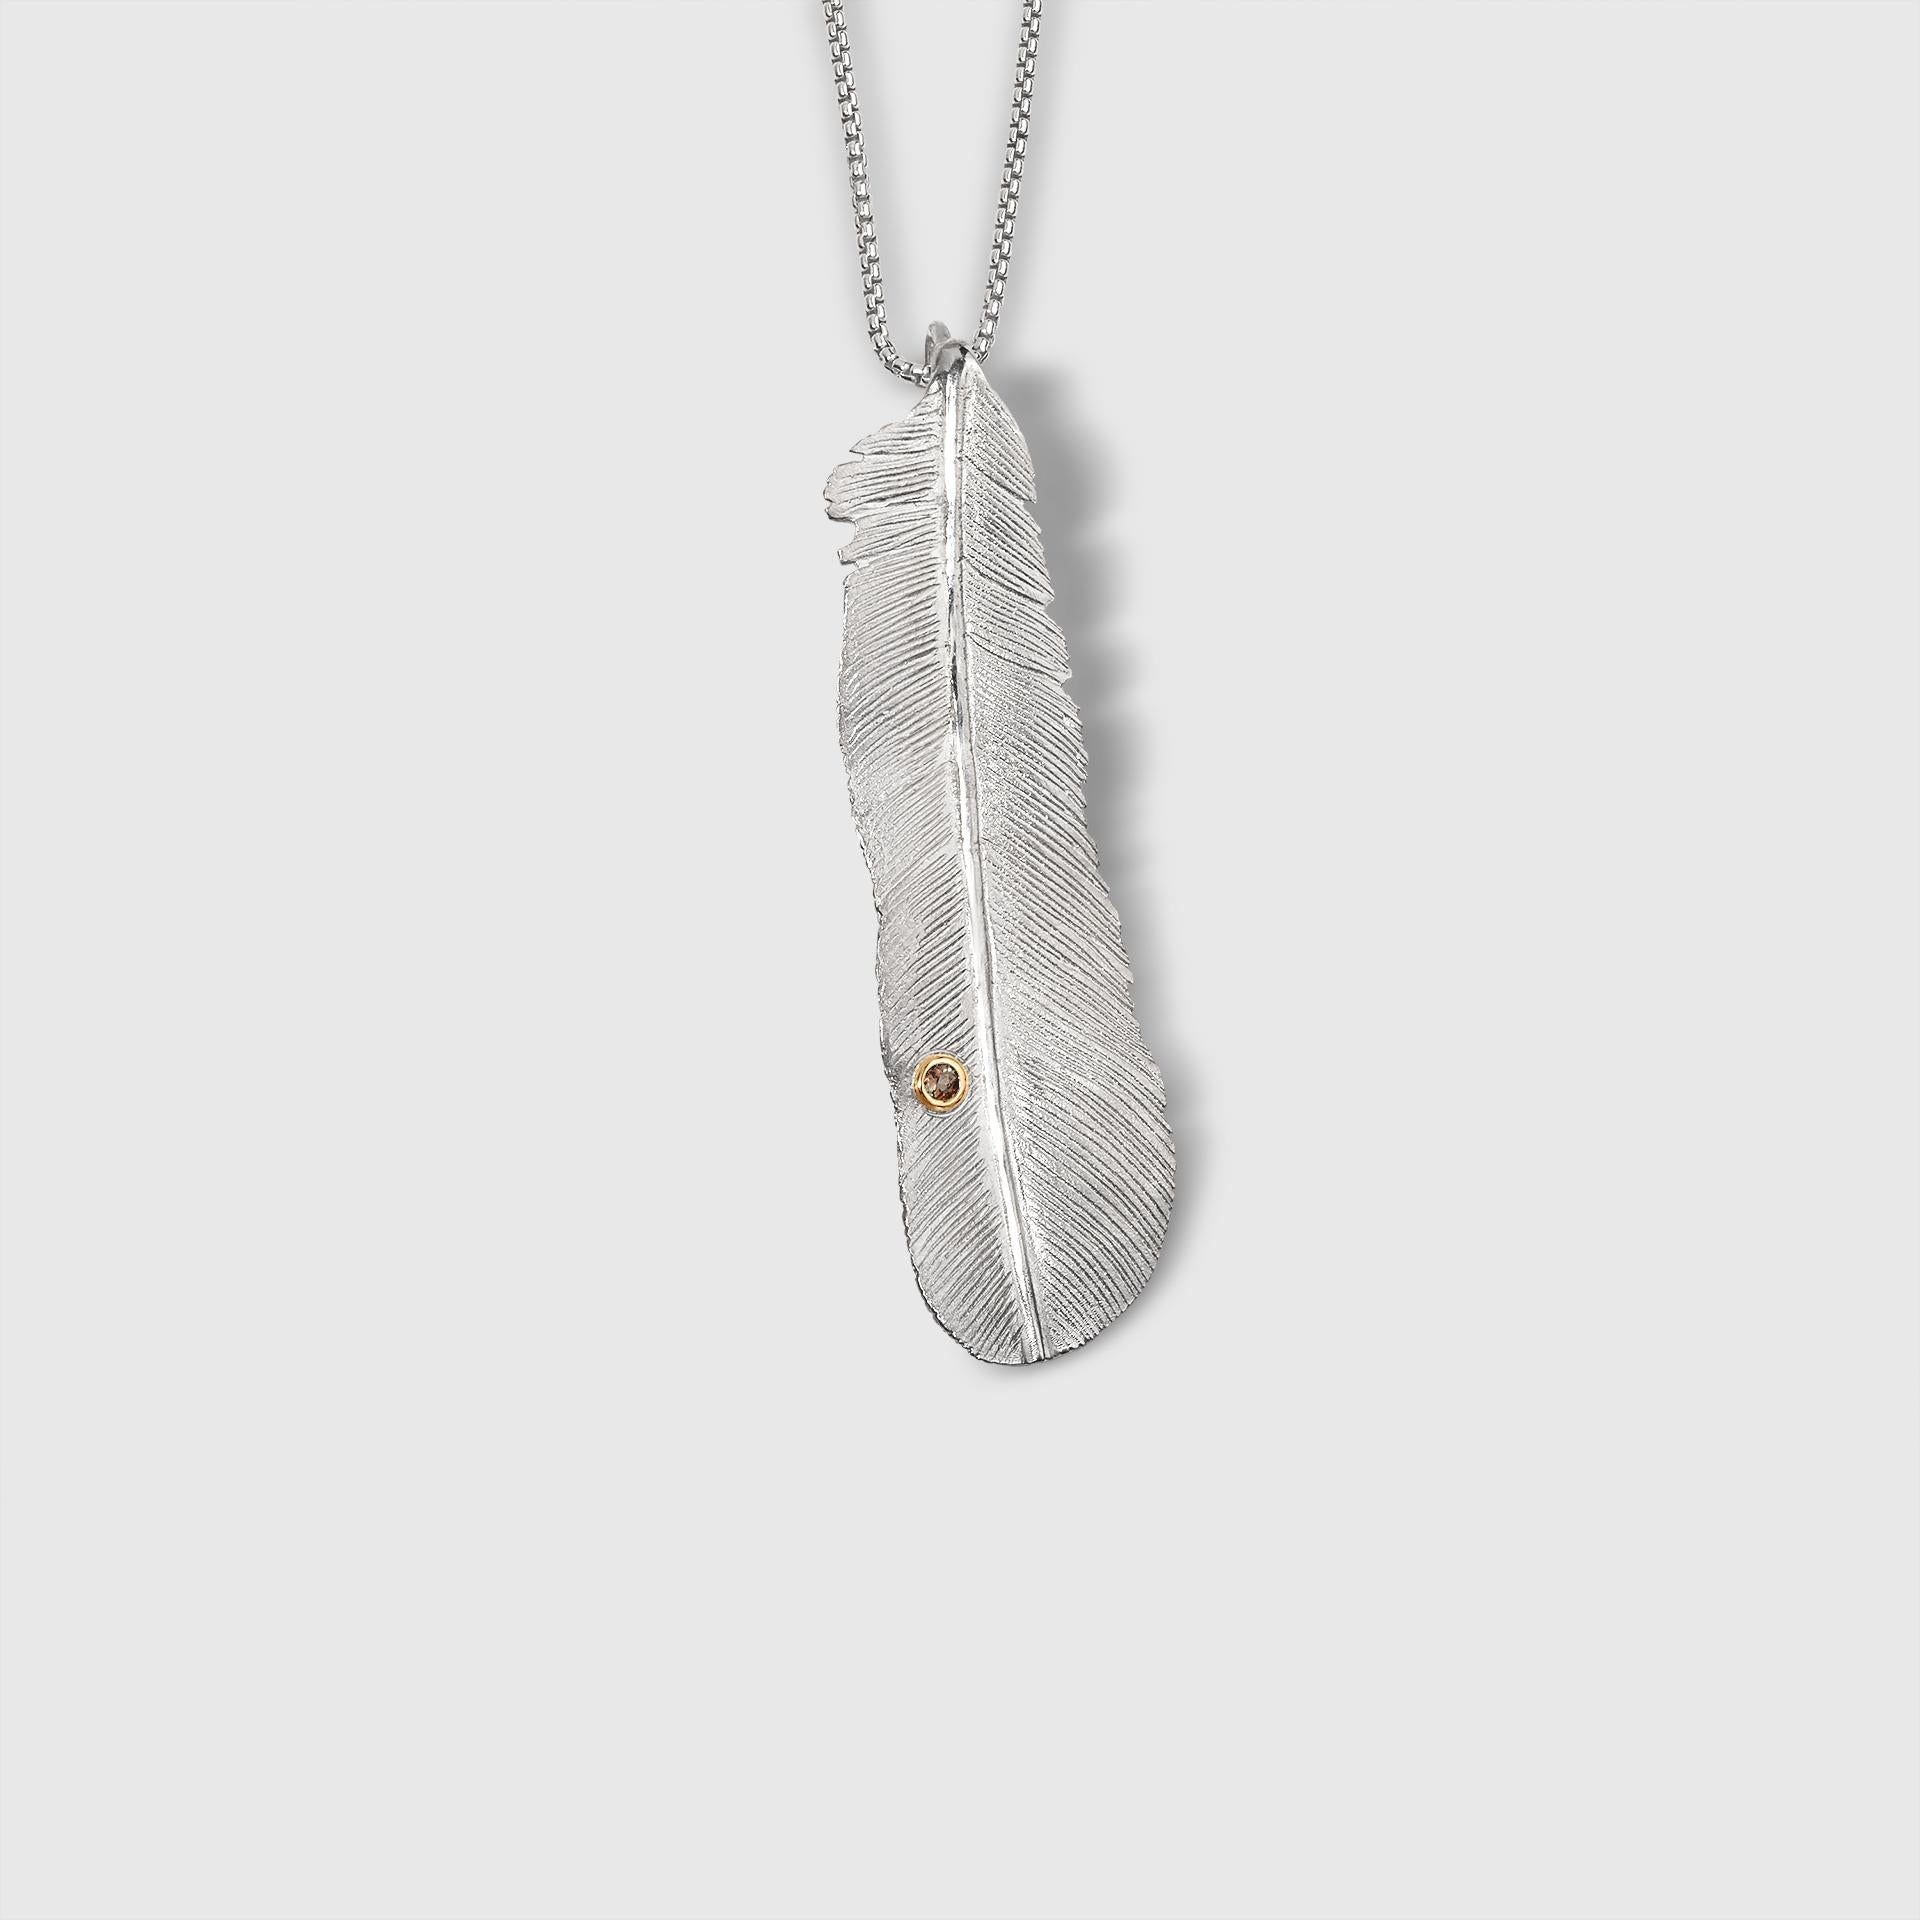 Medium Sterling Silver Detailed Feather Pendant with Andalusite detail set in 18K Yellow Gold Bezel, by Ashley Childs

This feather was originally carved by 